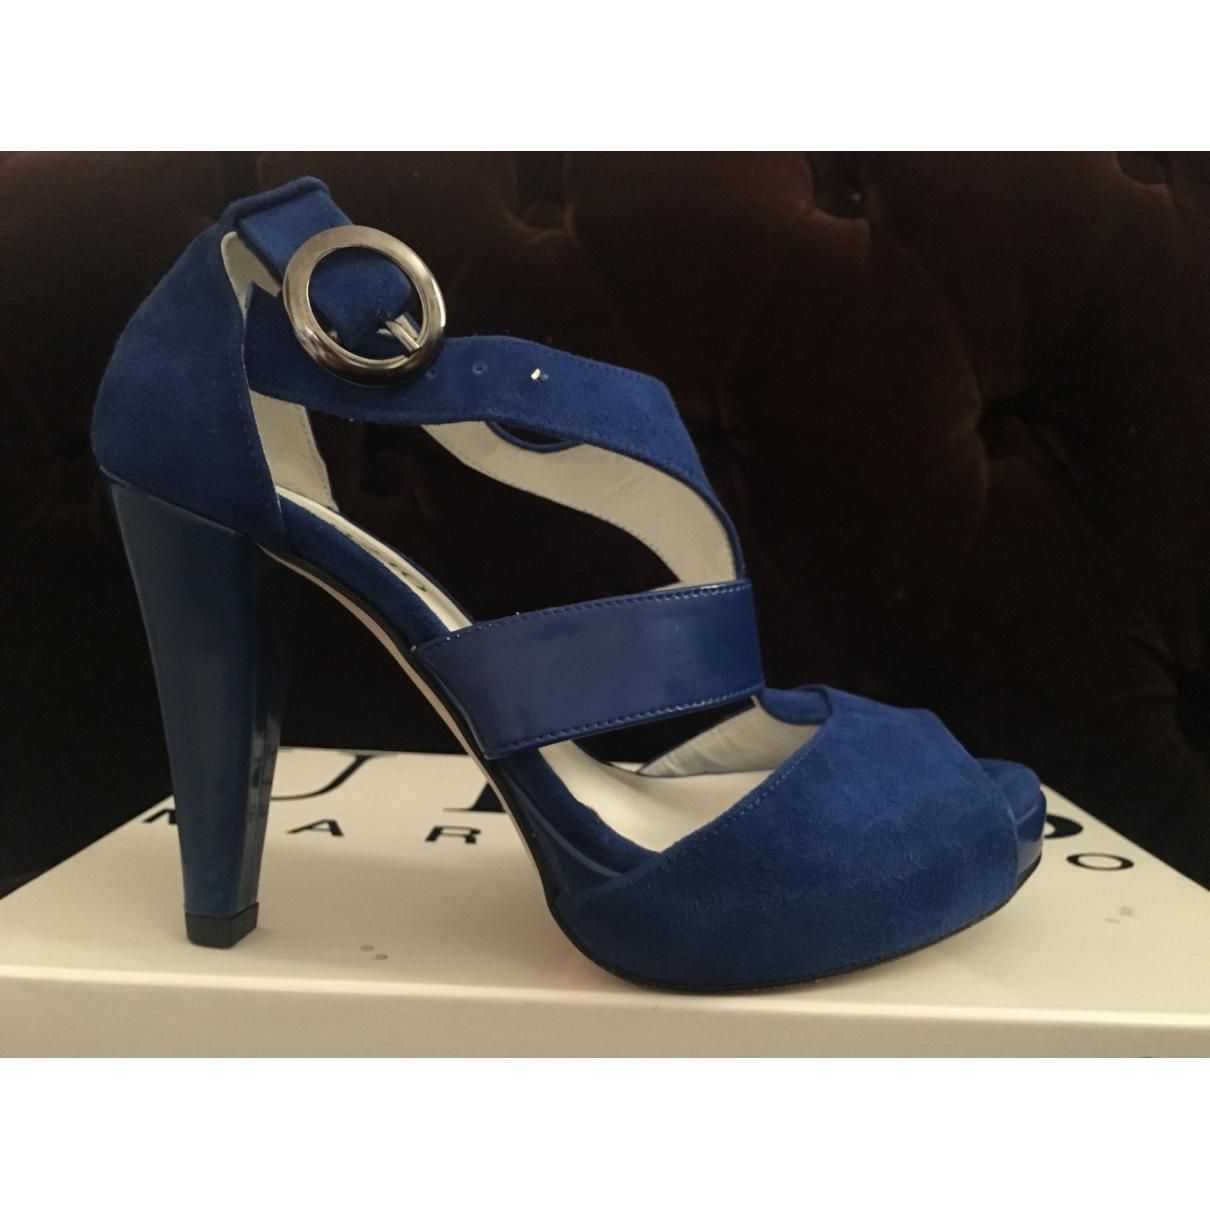 GUESS Heels for sale